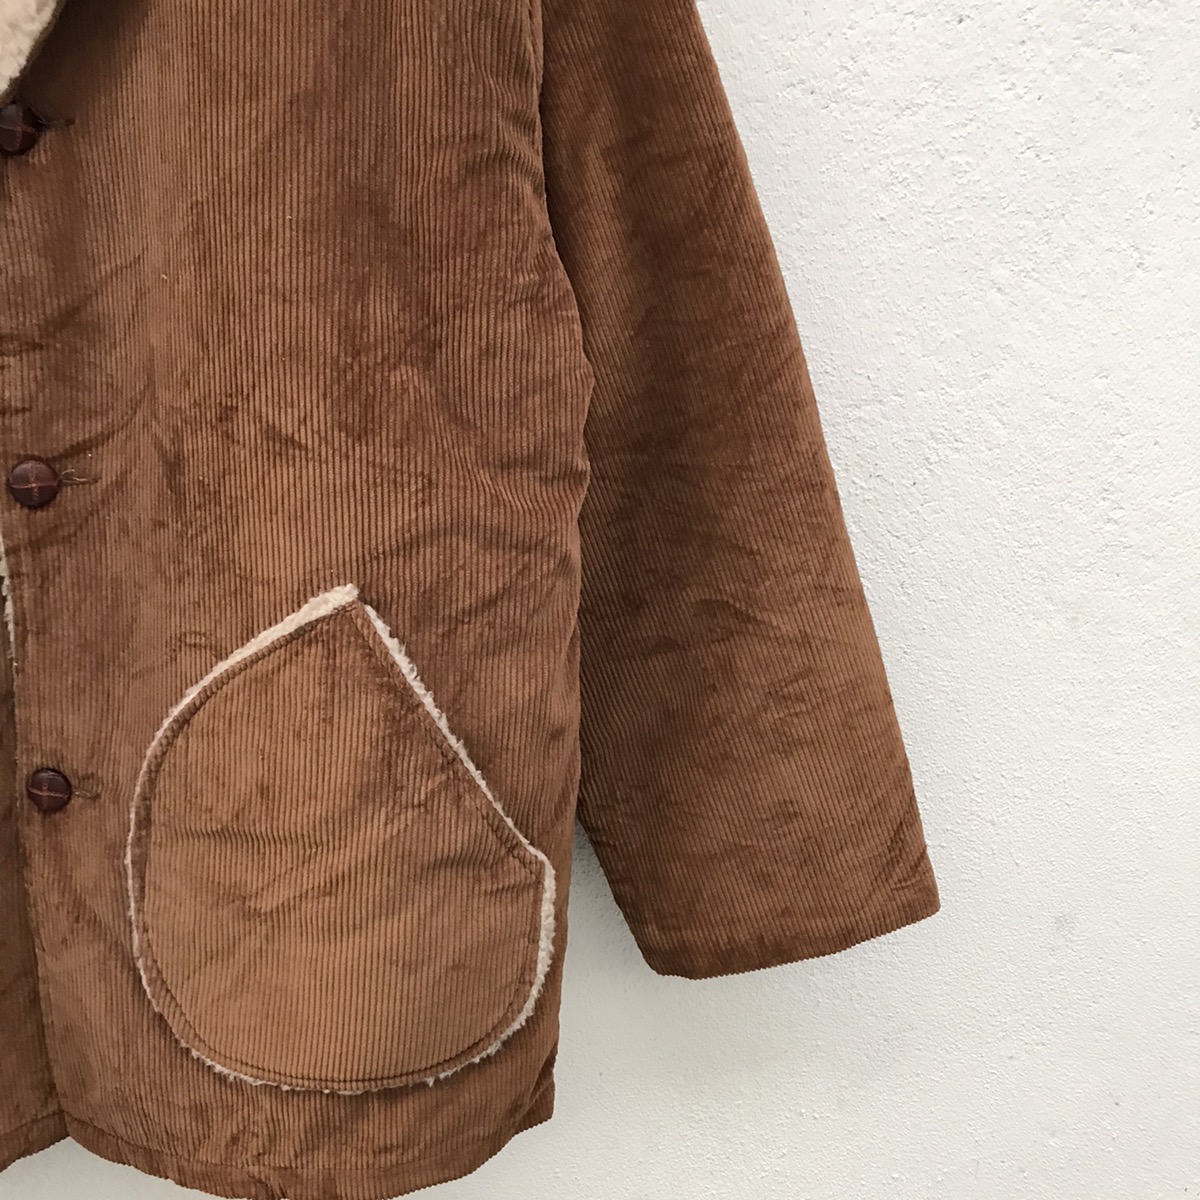 Vintage - Canyon Guide Outfitters Corduroy Jackets - 4